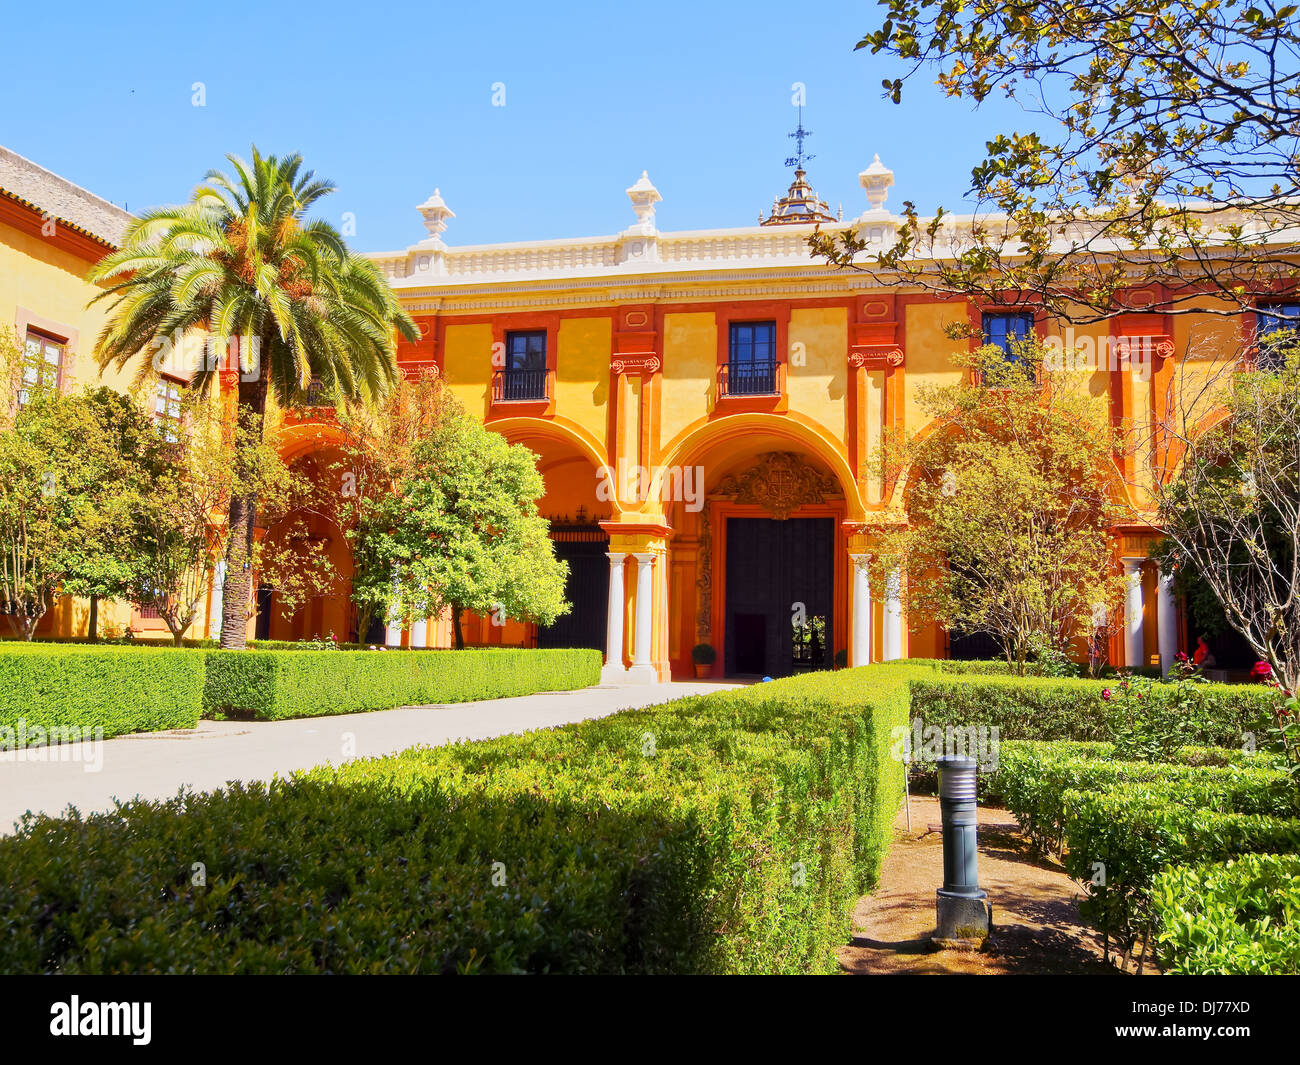 Reales Alcazares in Seville - residence developed from a former Moorish Palace in Andalusia, Spain Stock Photo